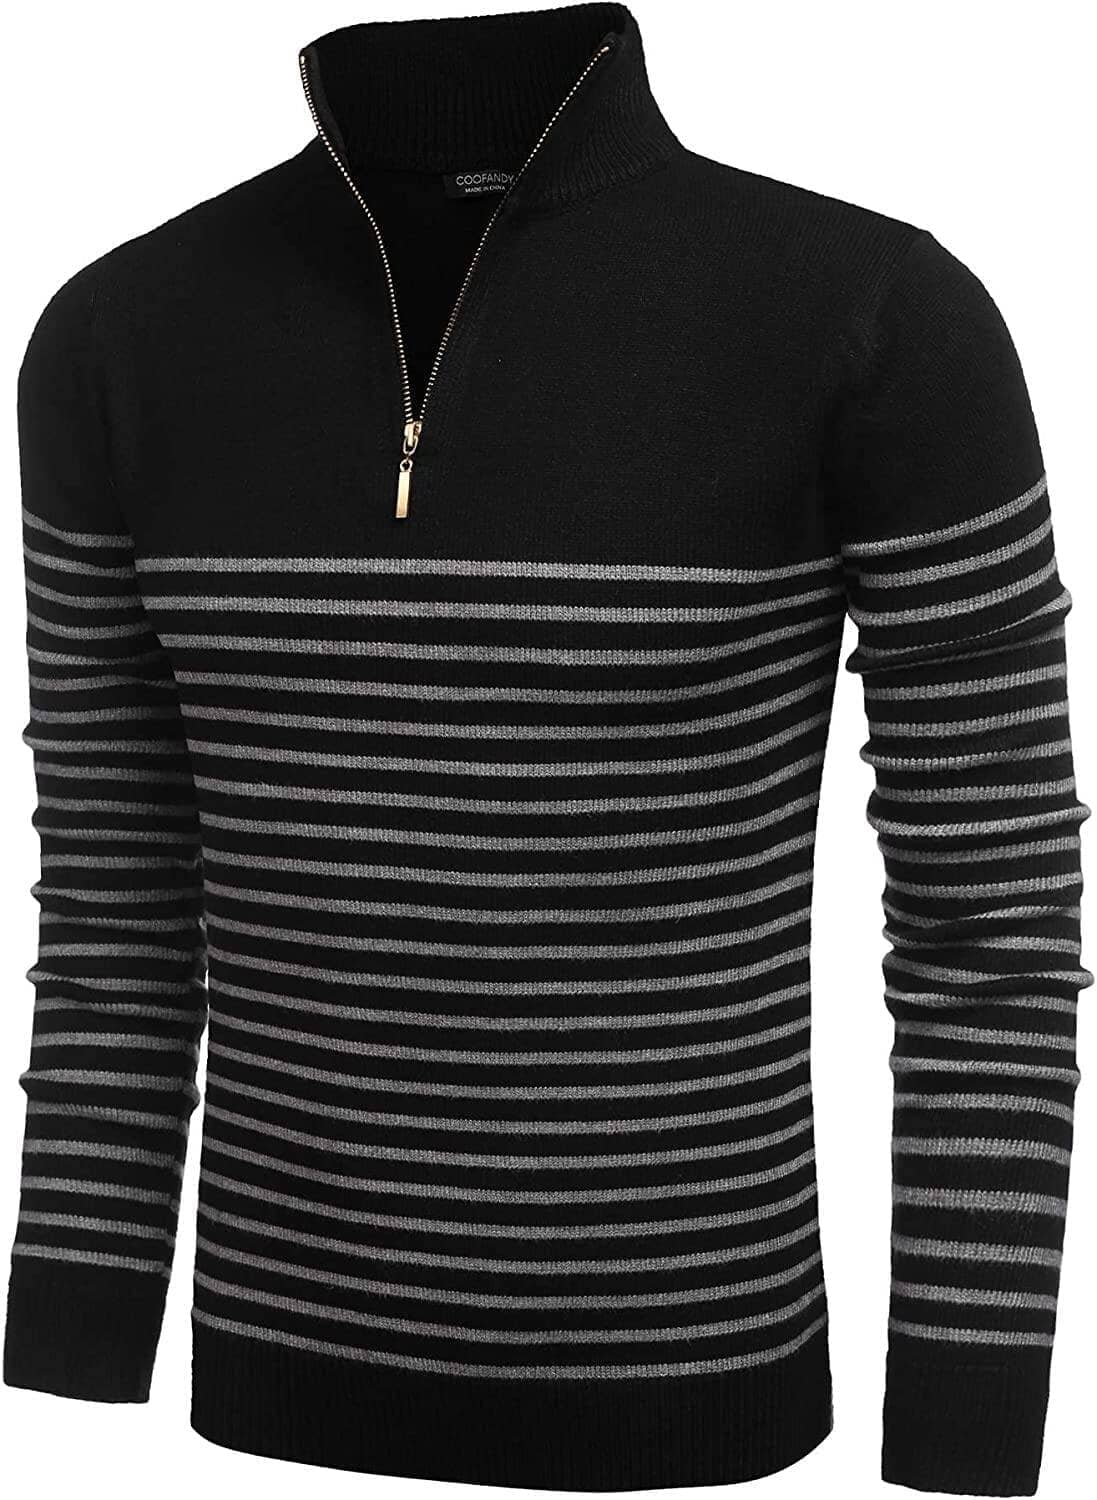 Coofandy Striped Zip Up Mock Neck Pullover Sweaters (US Only) Fashion Hoodies & Sweatshirts Simbama Black S 